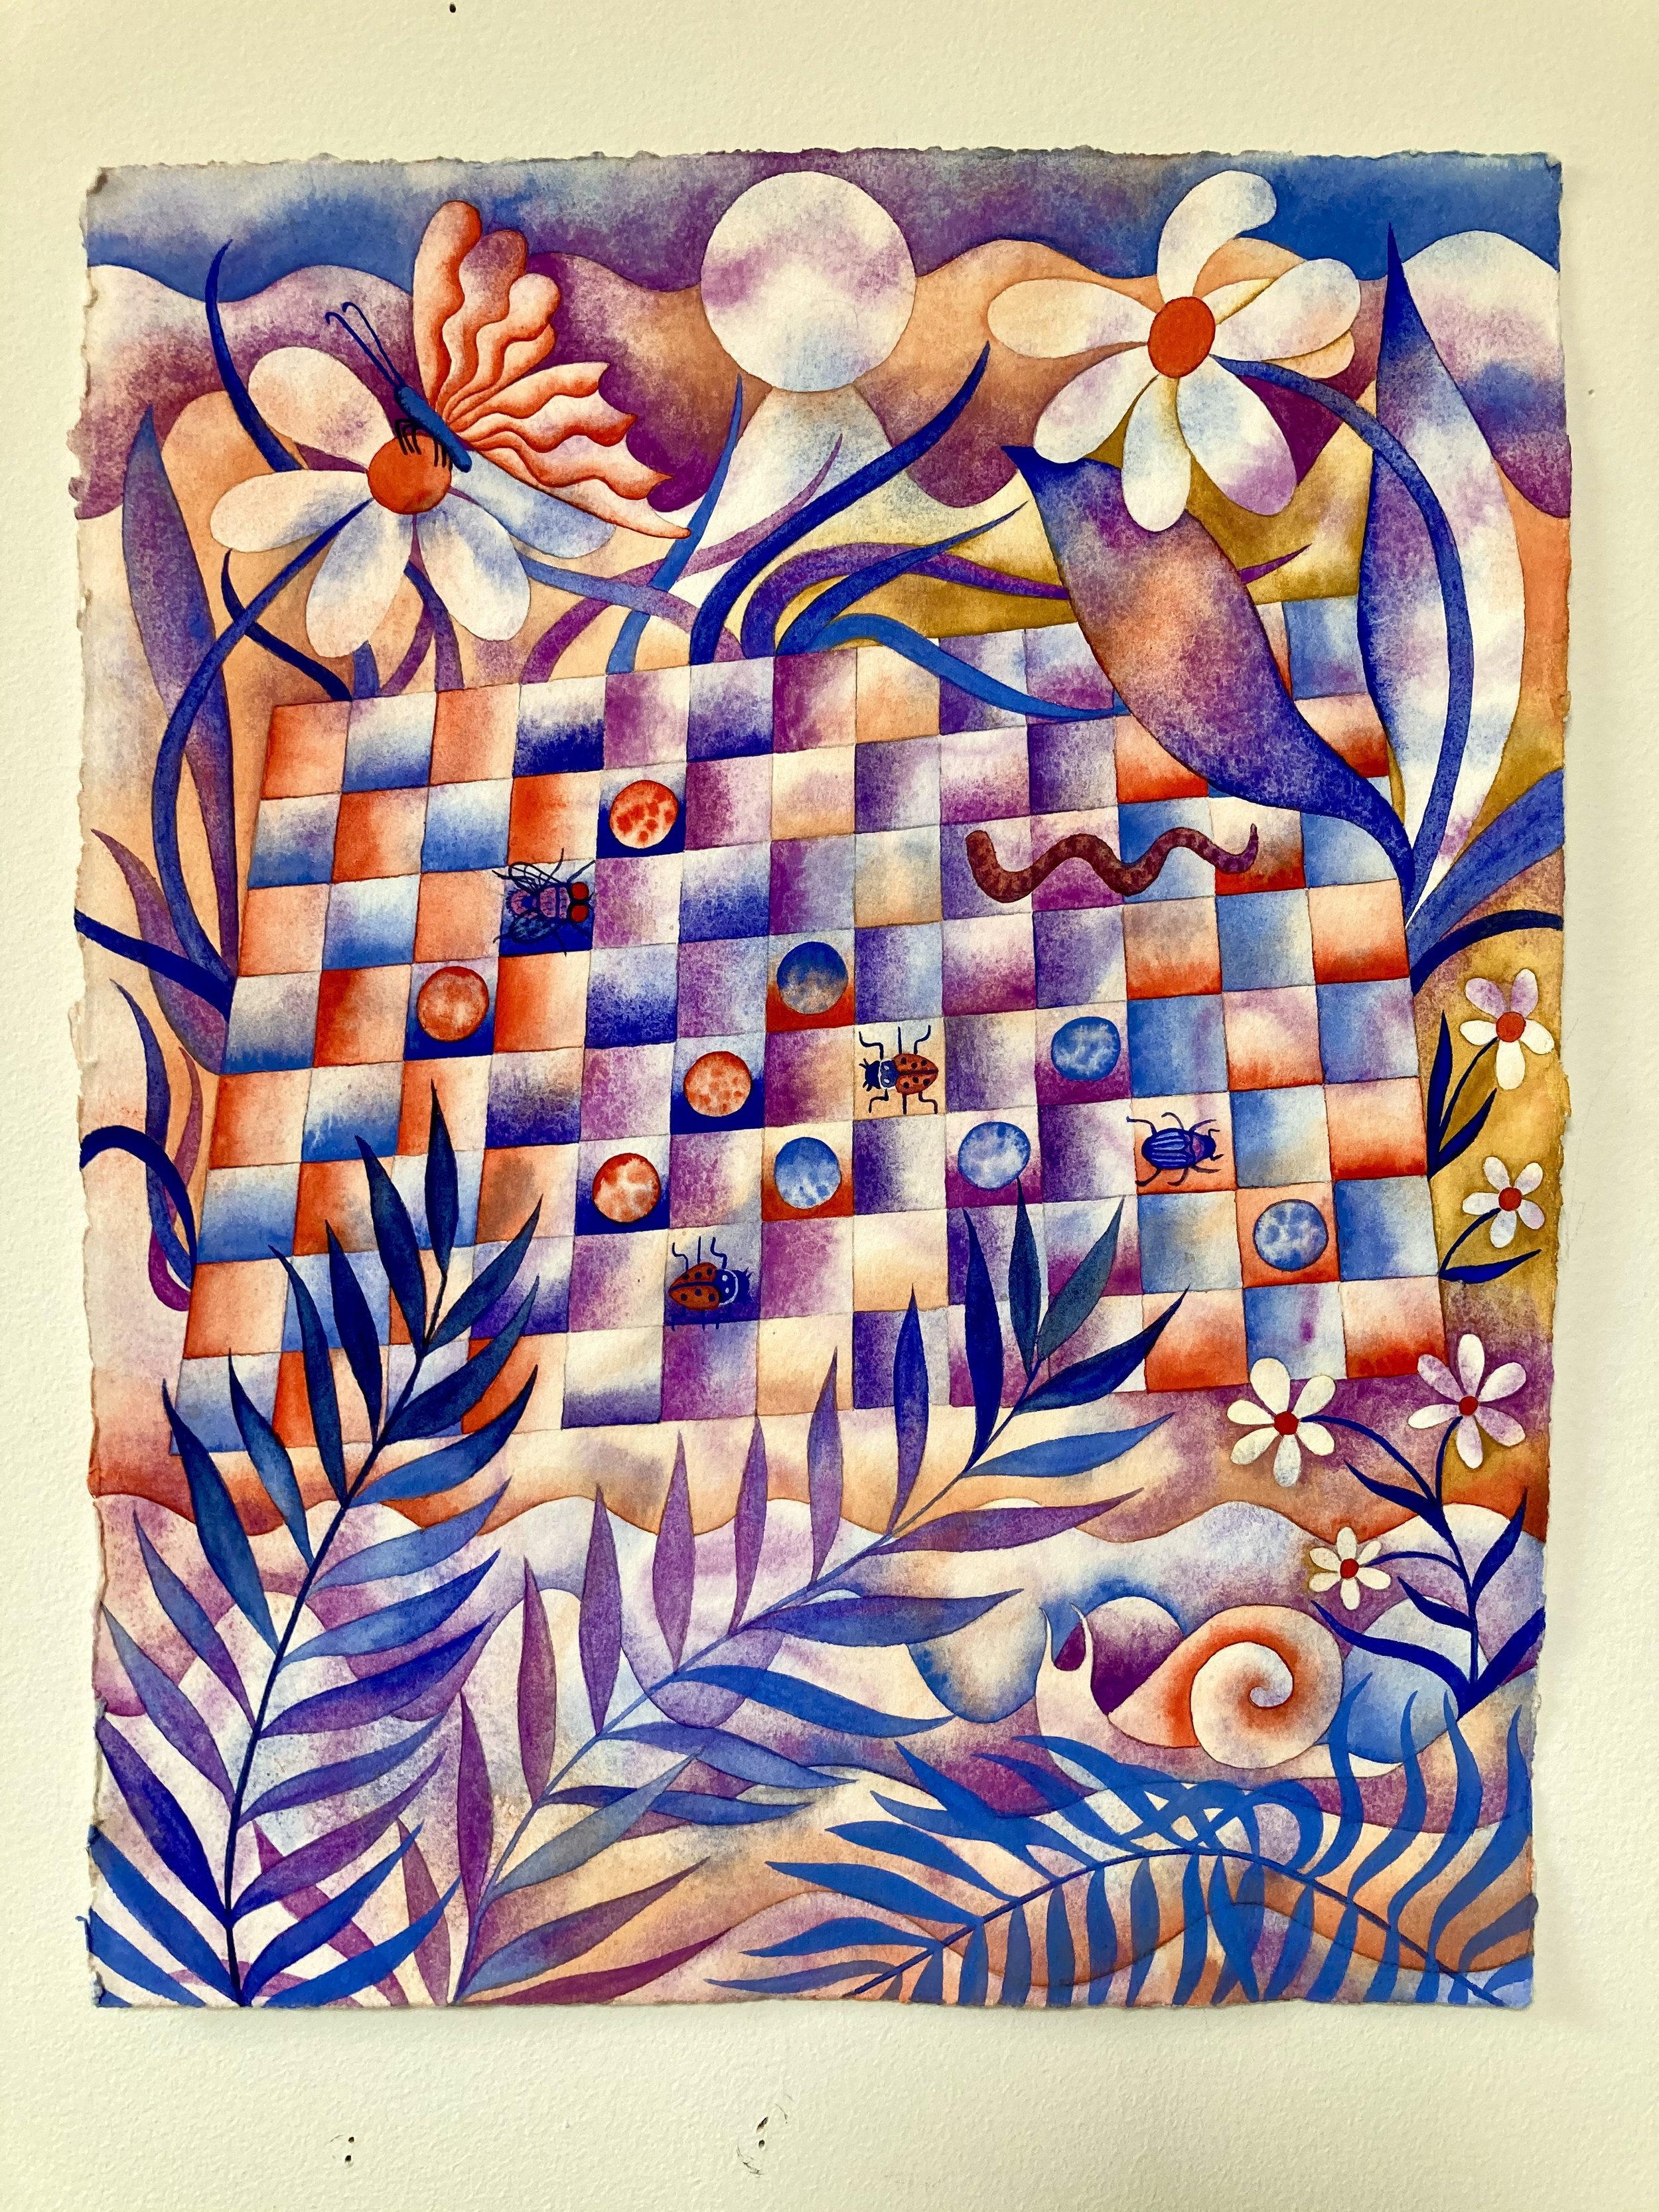 Erika Somogyi, "Forgotten Game," watercolor on paper 11in x14in, 2021.